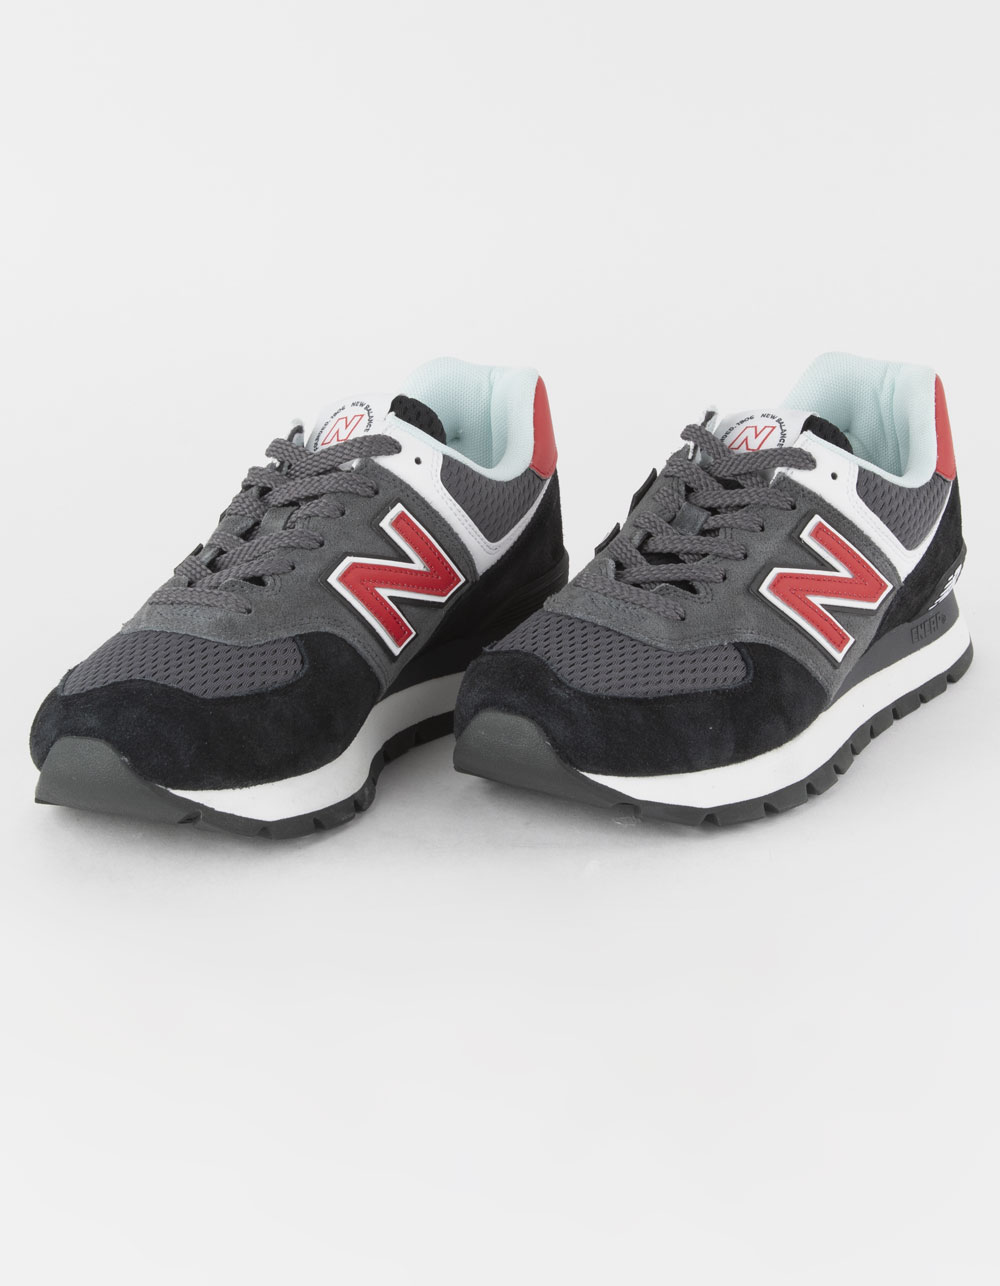 NEW BALANCE Shoes - BLK/RED | Tillys